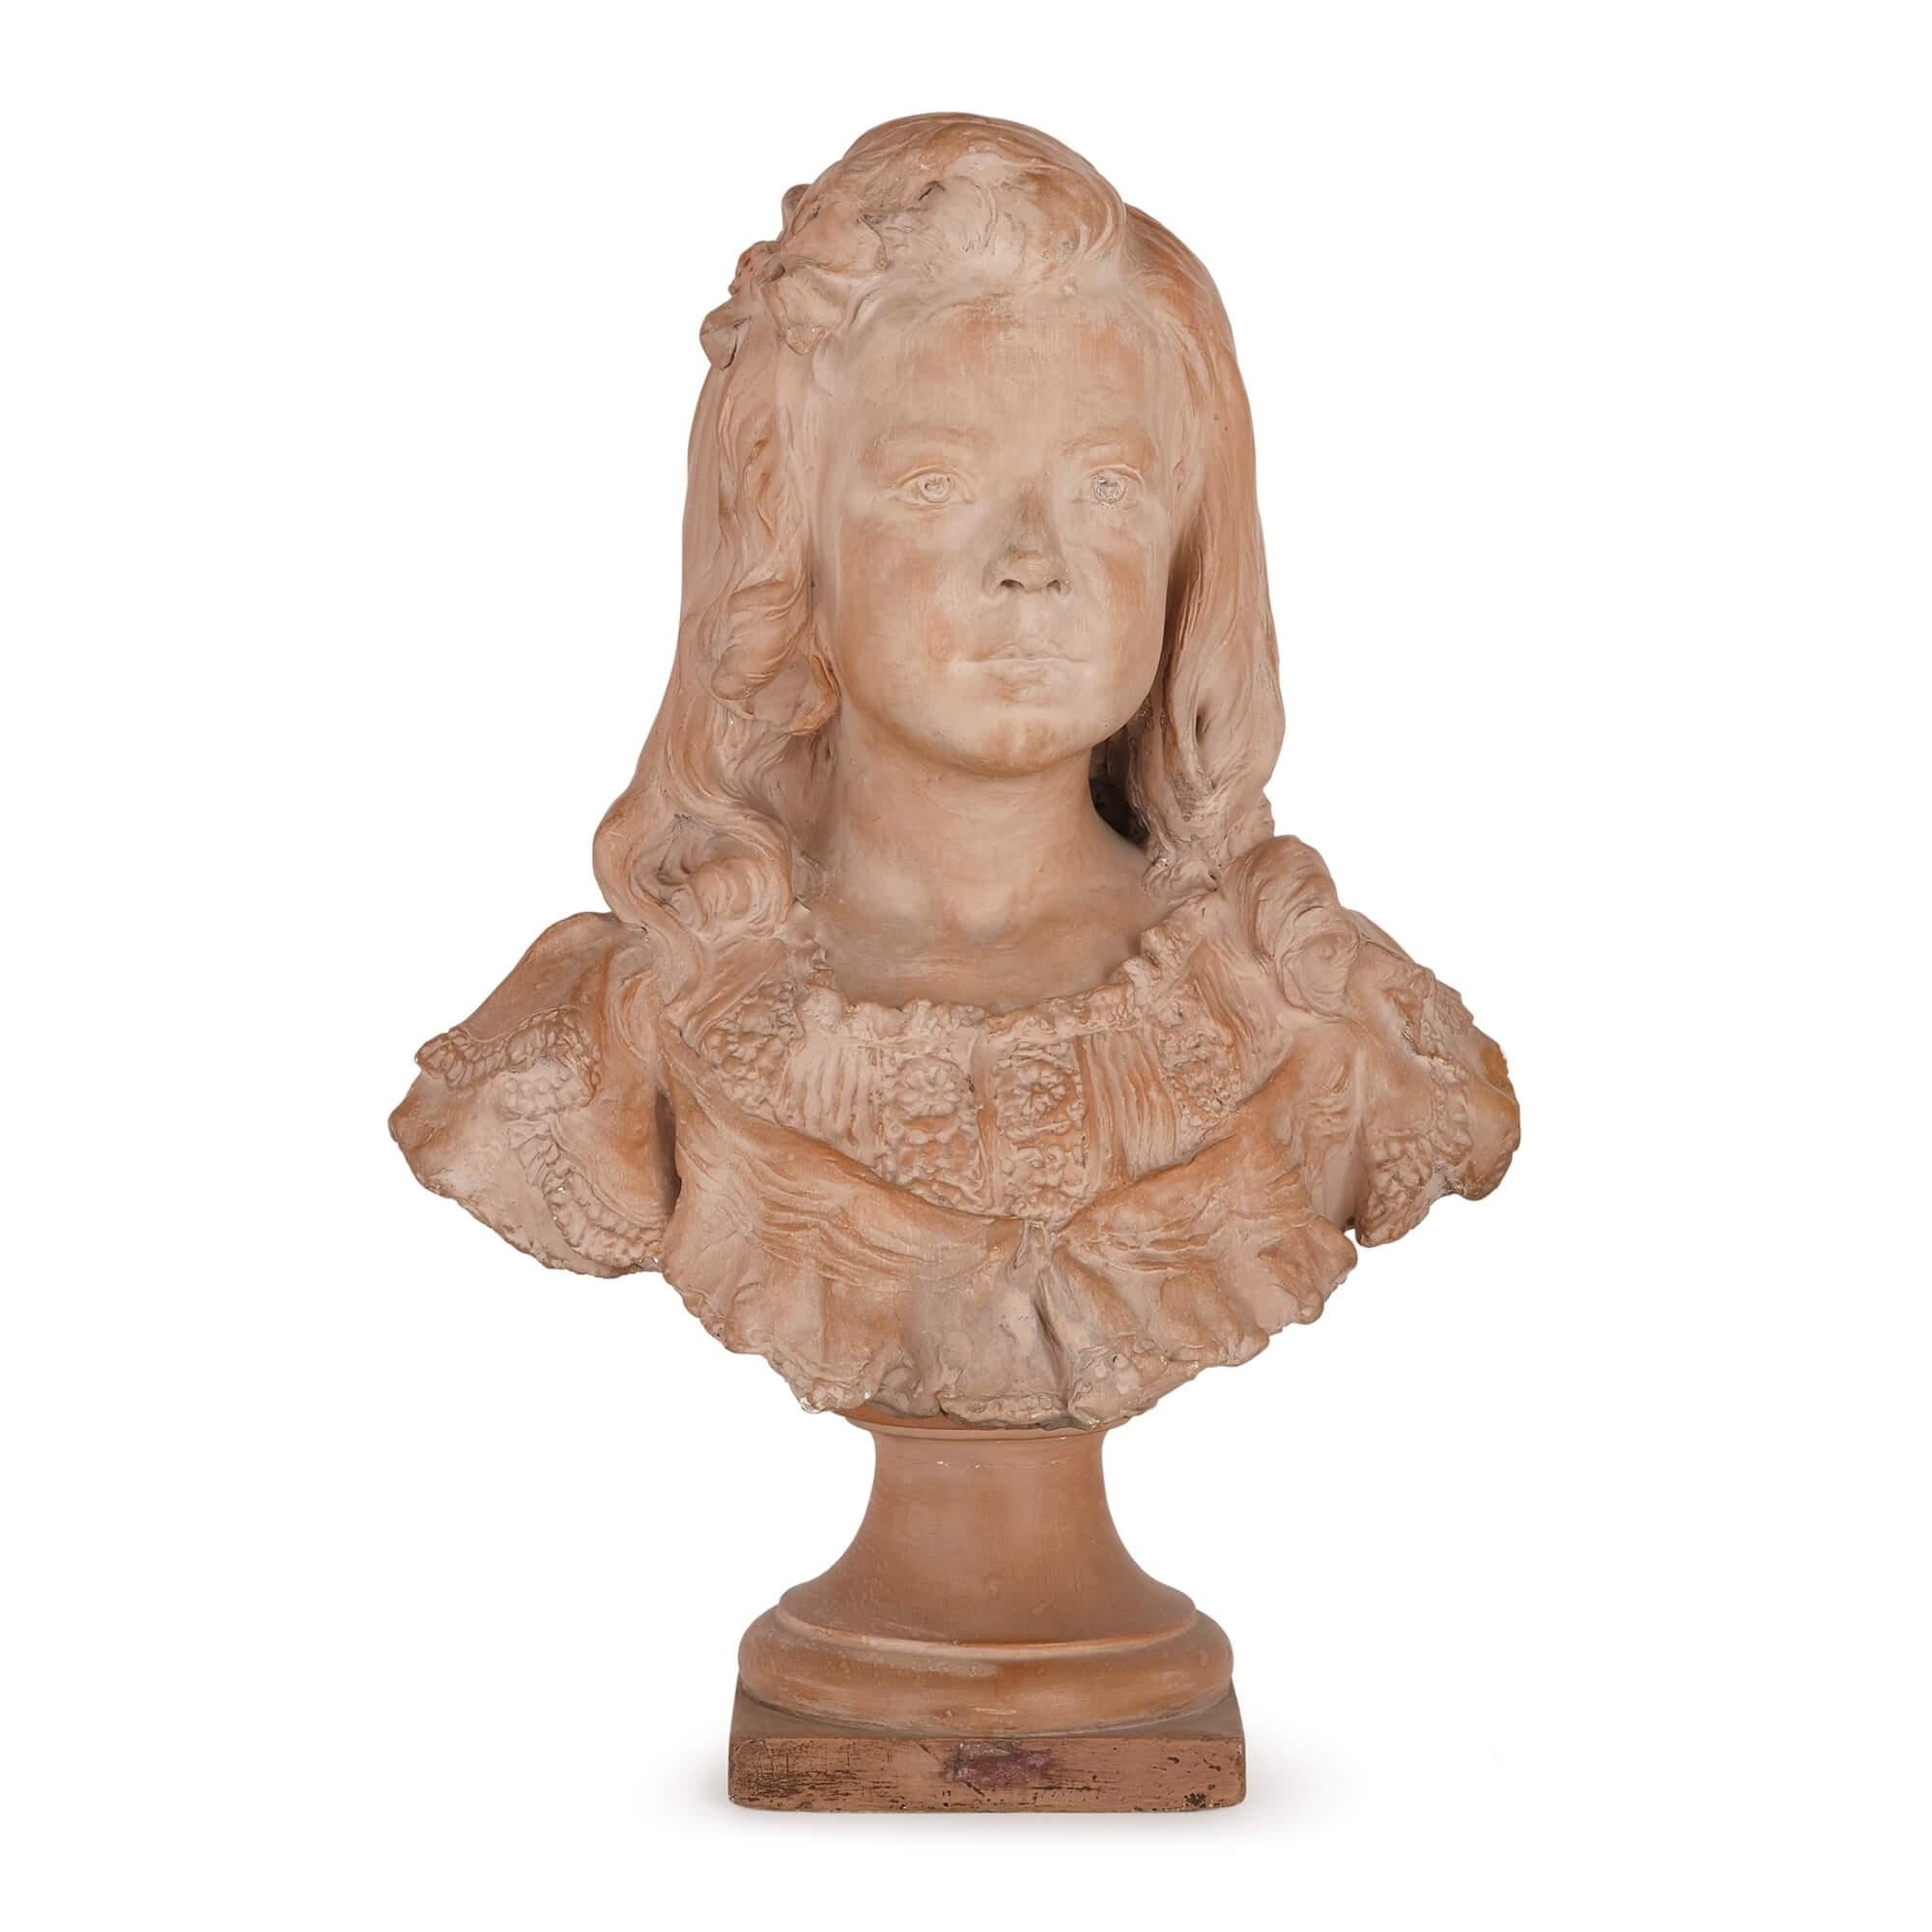 Terracotta portrait bust of a girl by Henri Weigele
French, late 19th Century
Height 57cm, width 40cm, depth 23cm

This charming portrait bust of a young girl is crafted from terracotta. The young girl is rendered naturalistically, with a poised and